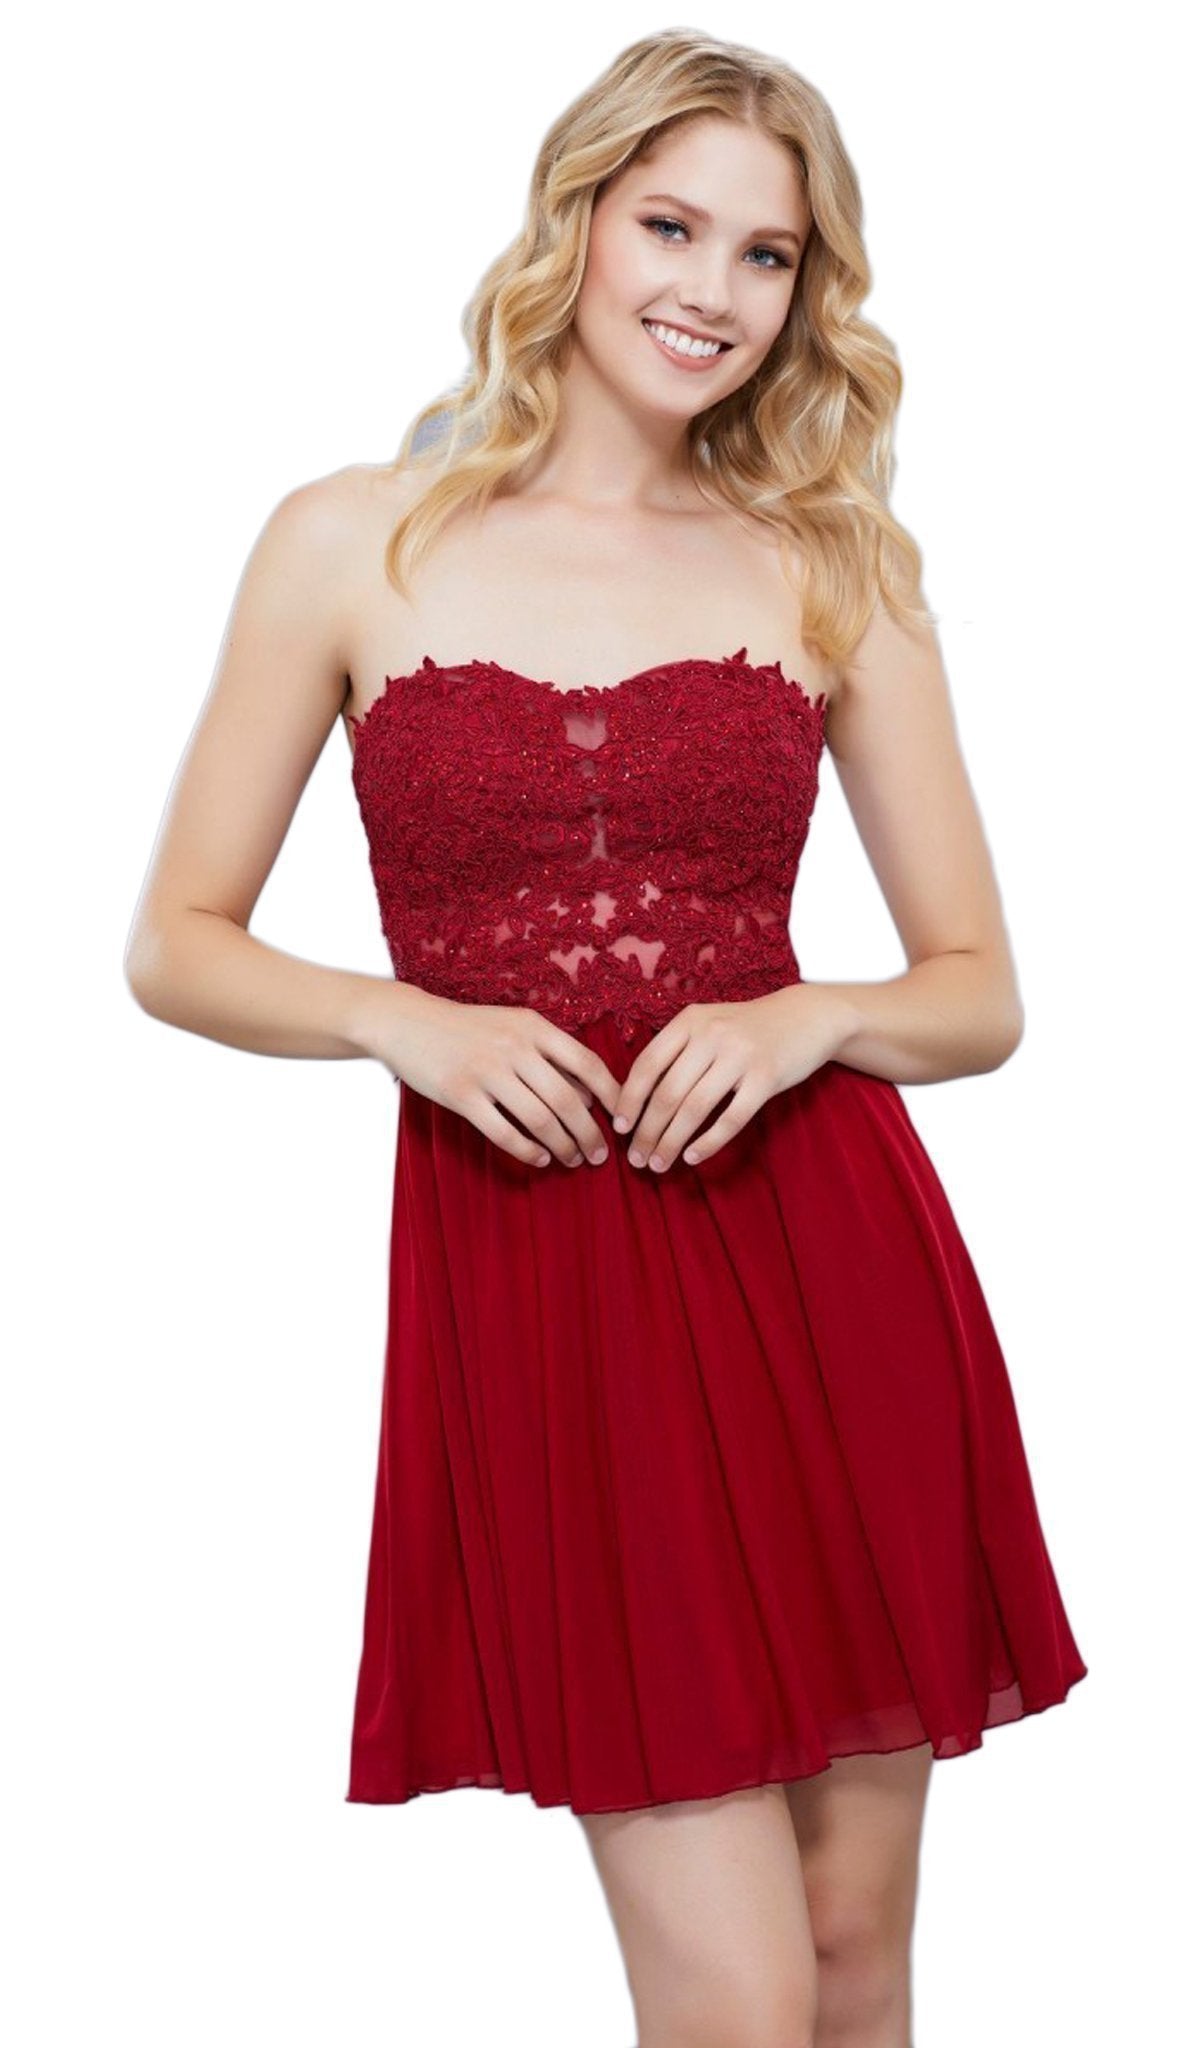 Nox Anabel - 6314 Strapless Embellished Sweetheart Cocktail Dress Special Occasion Dress